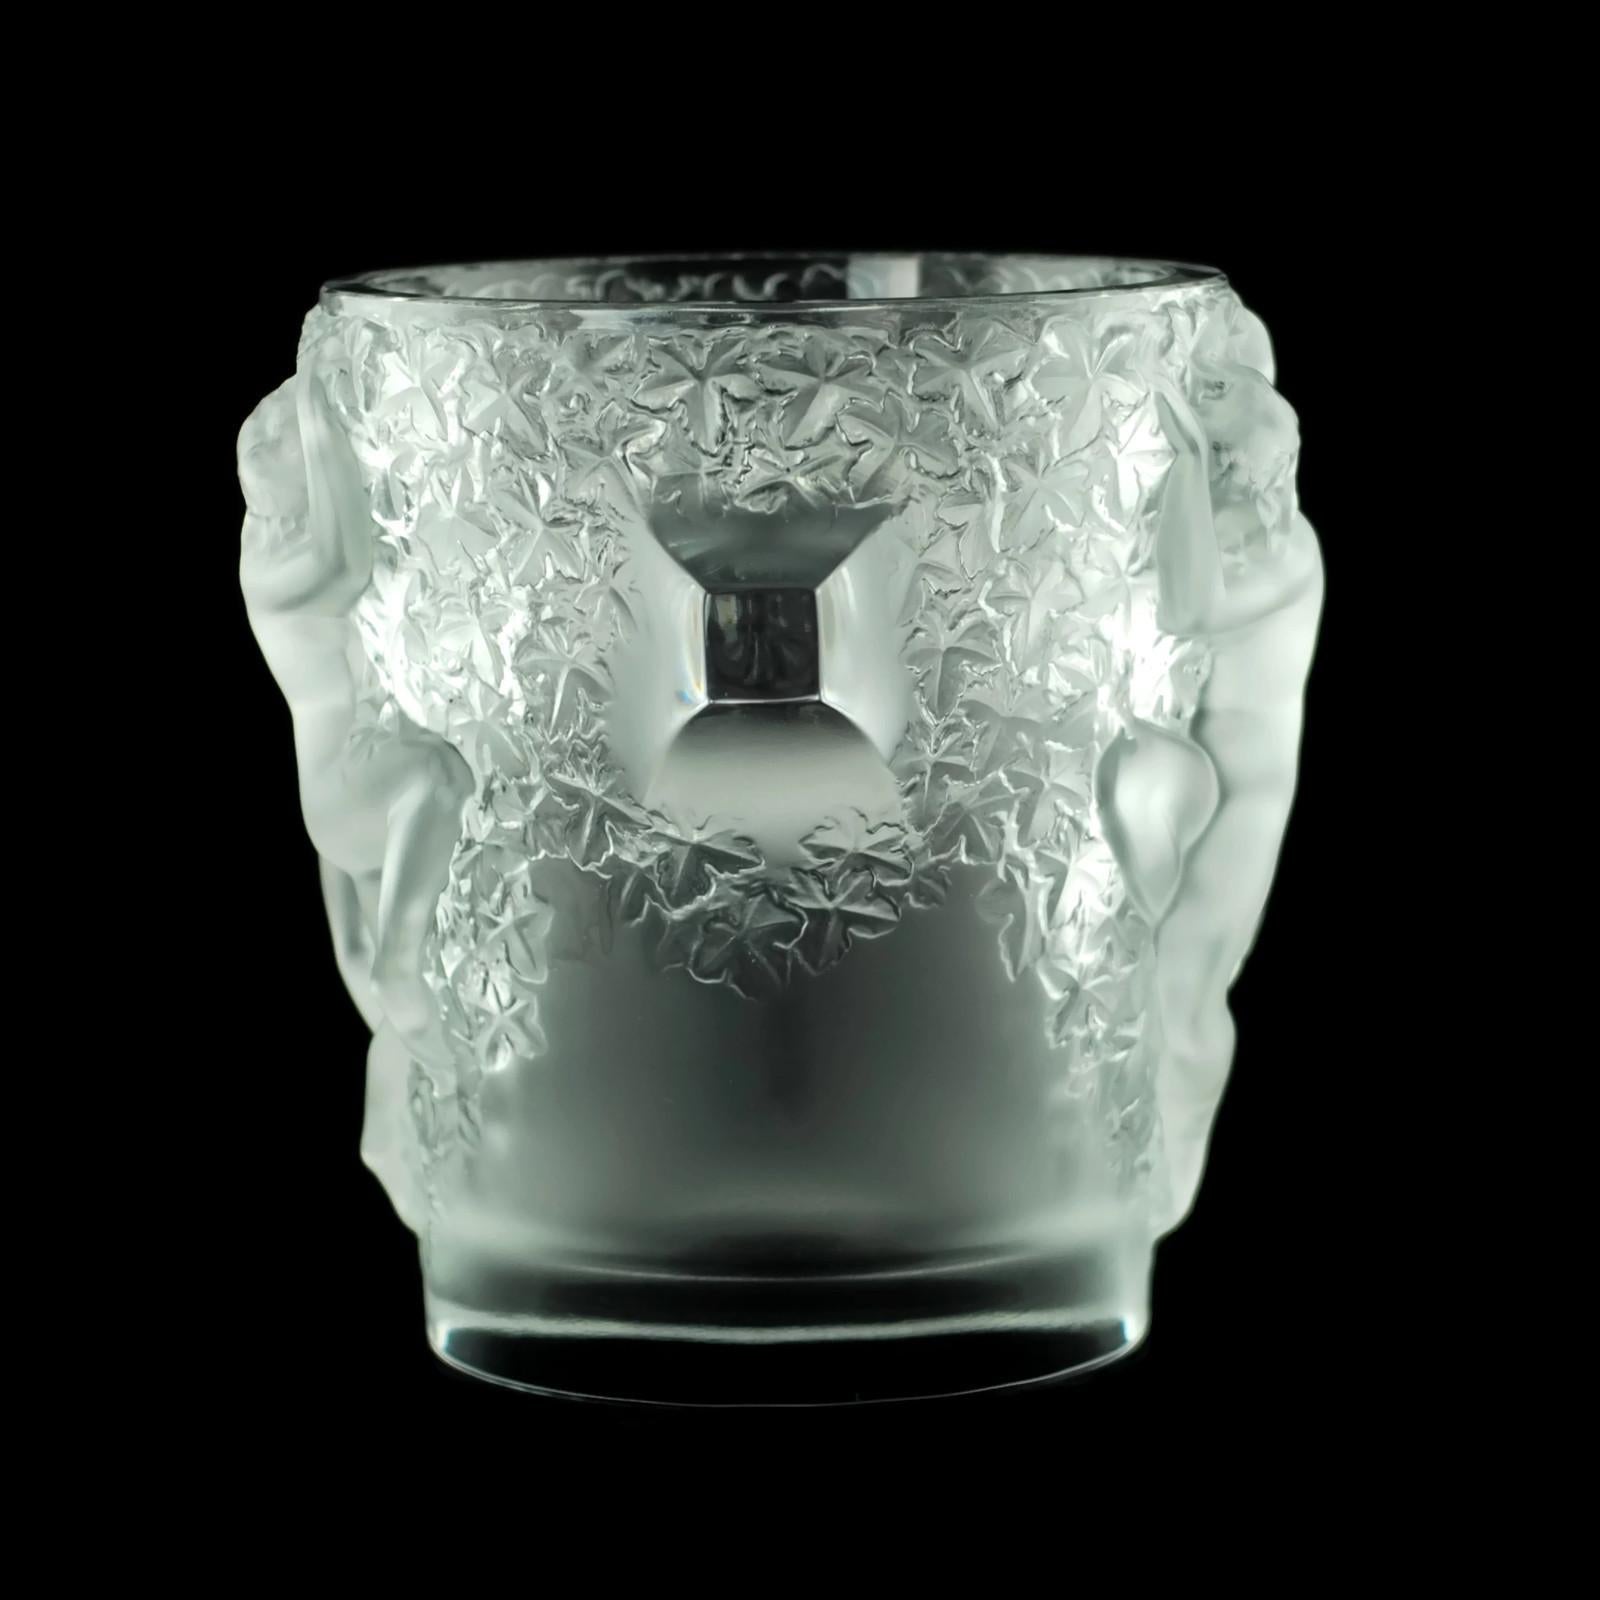 This French crystal champagne cooler/ice bucket was designed in the mid-1950s by Marc Lalique. The design is titled Ganymede after the mythological youth kidnapped by Zeus who eventually went on to serve as his cupbearer. The exterior of the ice